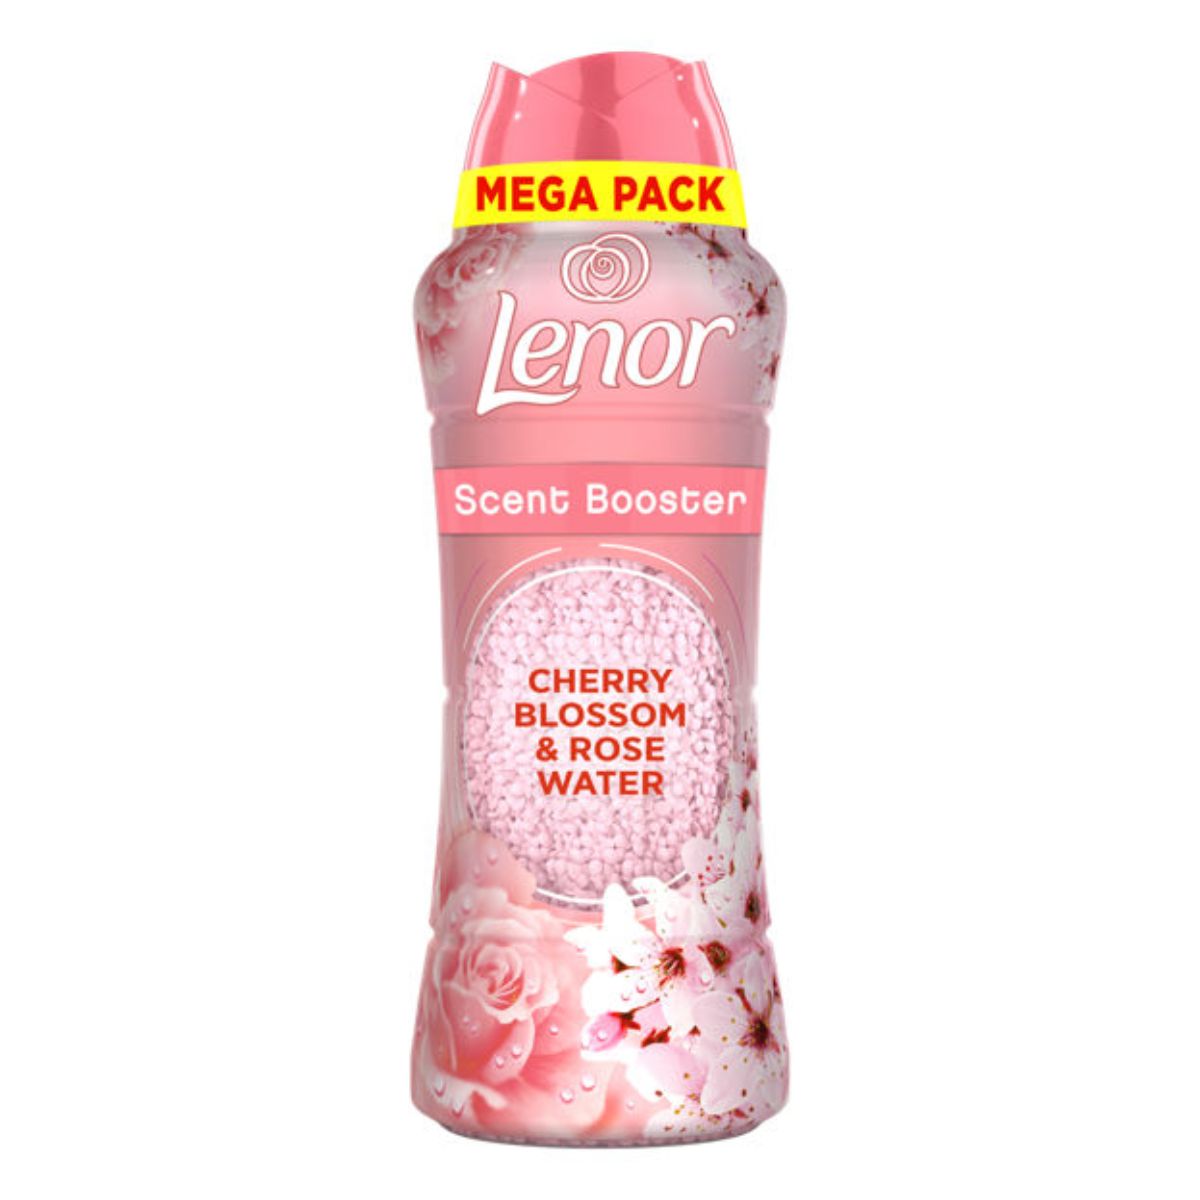 A bottle of Lenor - In Wash Scent Booster Cherry Blossom & Rose Water - 570g, packaged in a pink container with floral imagery.